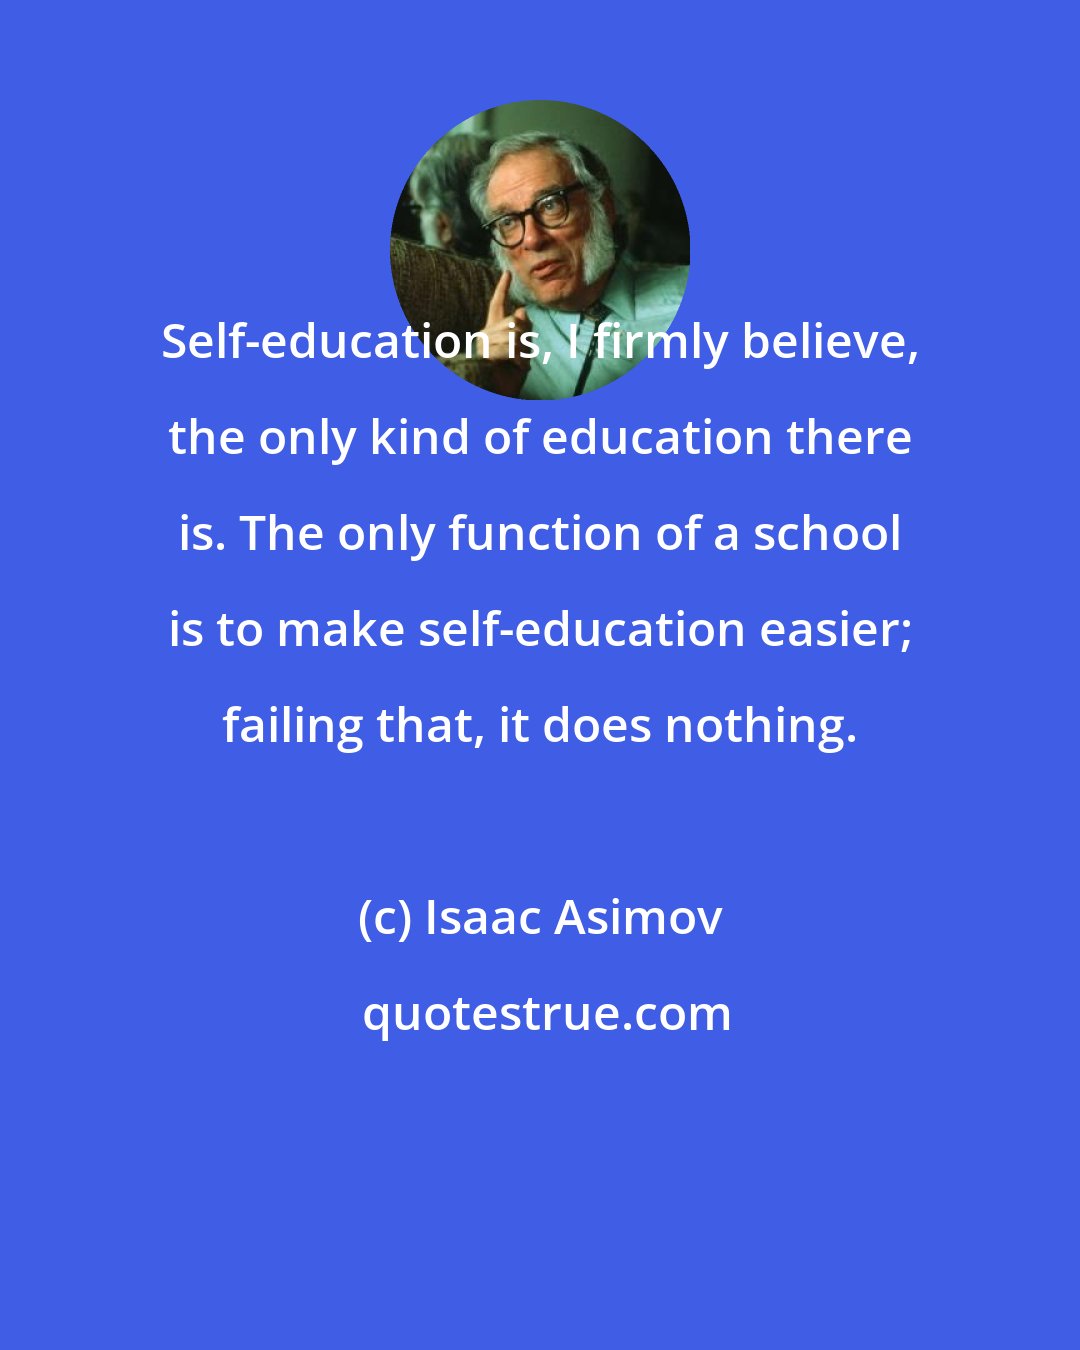 Isaac Asimov: Self-education is, I firmly believe, the only kind of education there is. The only function of a school is to make self-education easier; failing that, it does nothing.